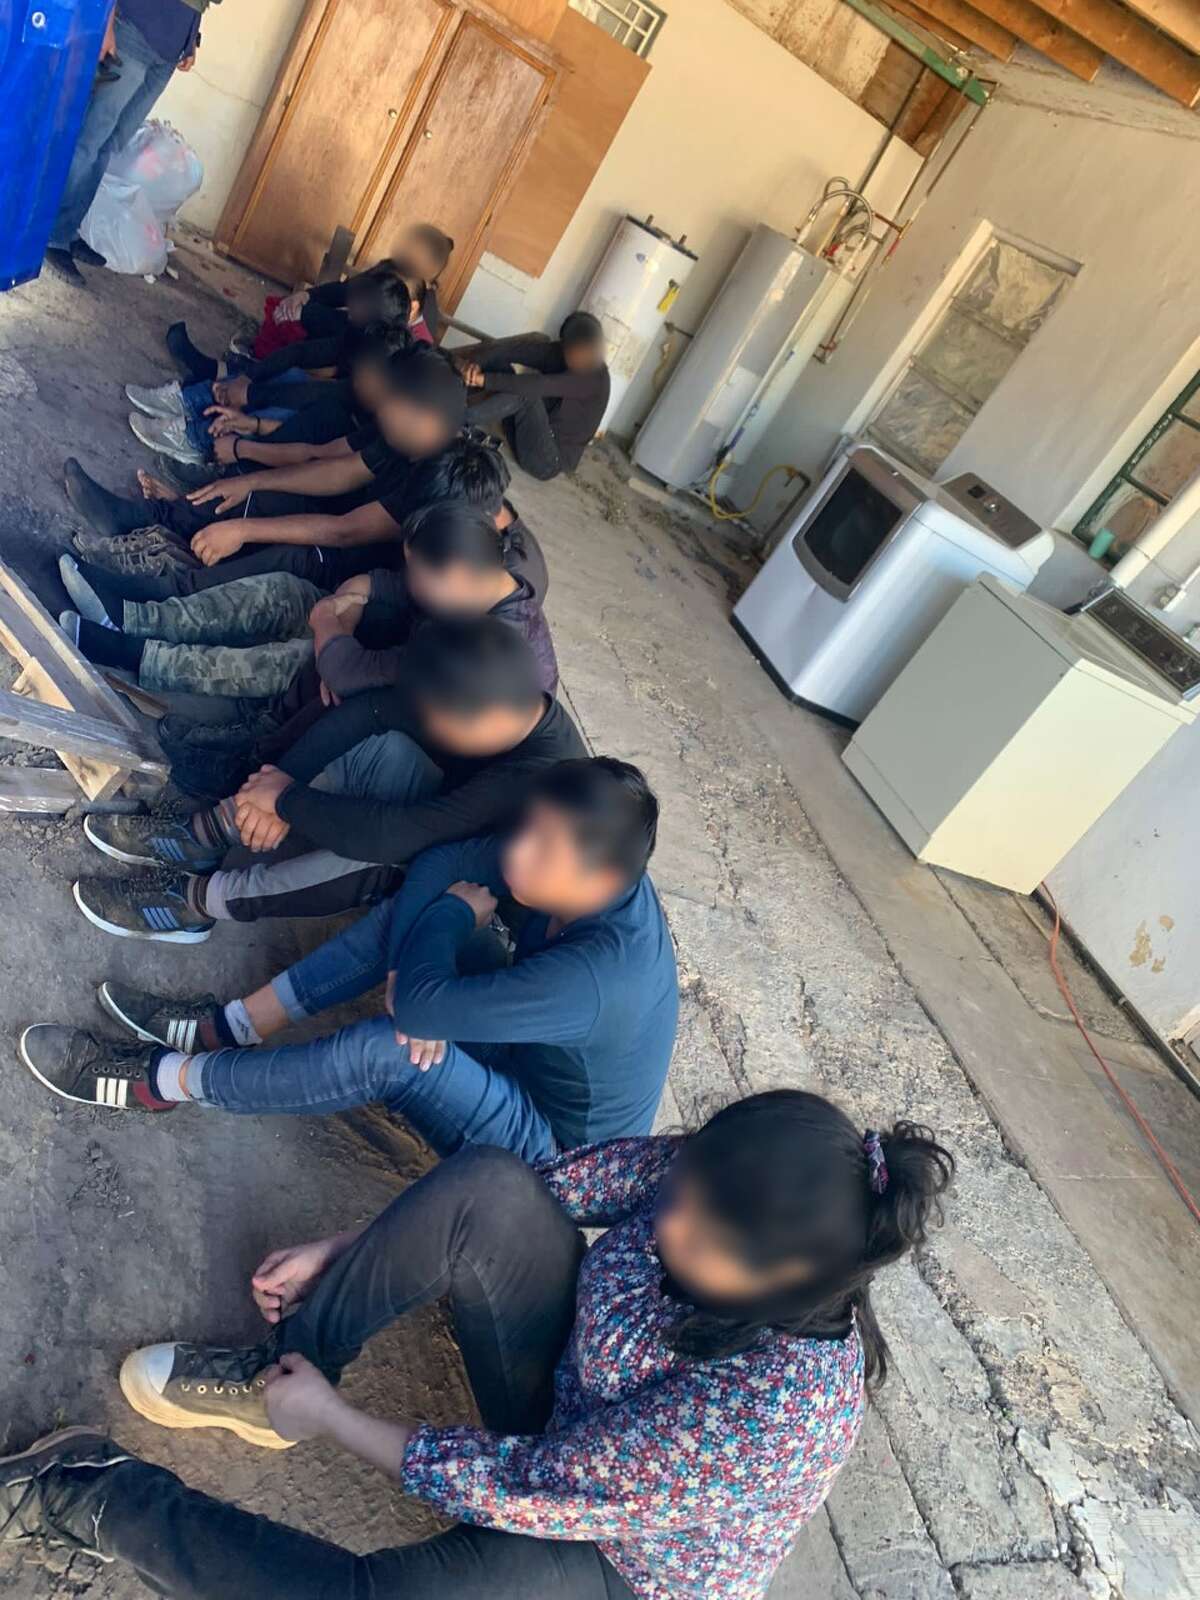 U.S. Border Patrol agents along with the Texas Department of Public Safety discovered 13 migrants inside a stash house on Nov. 15